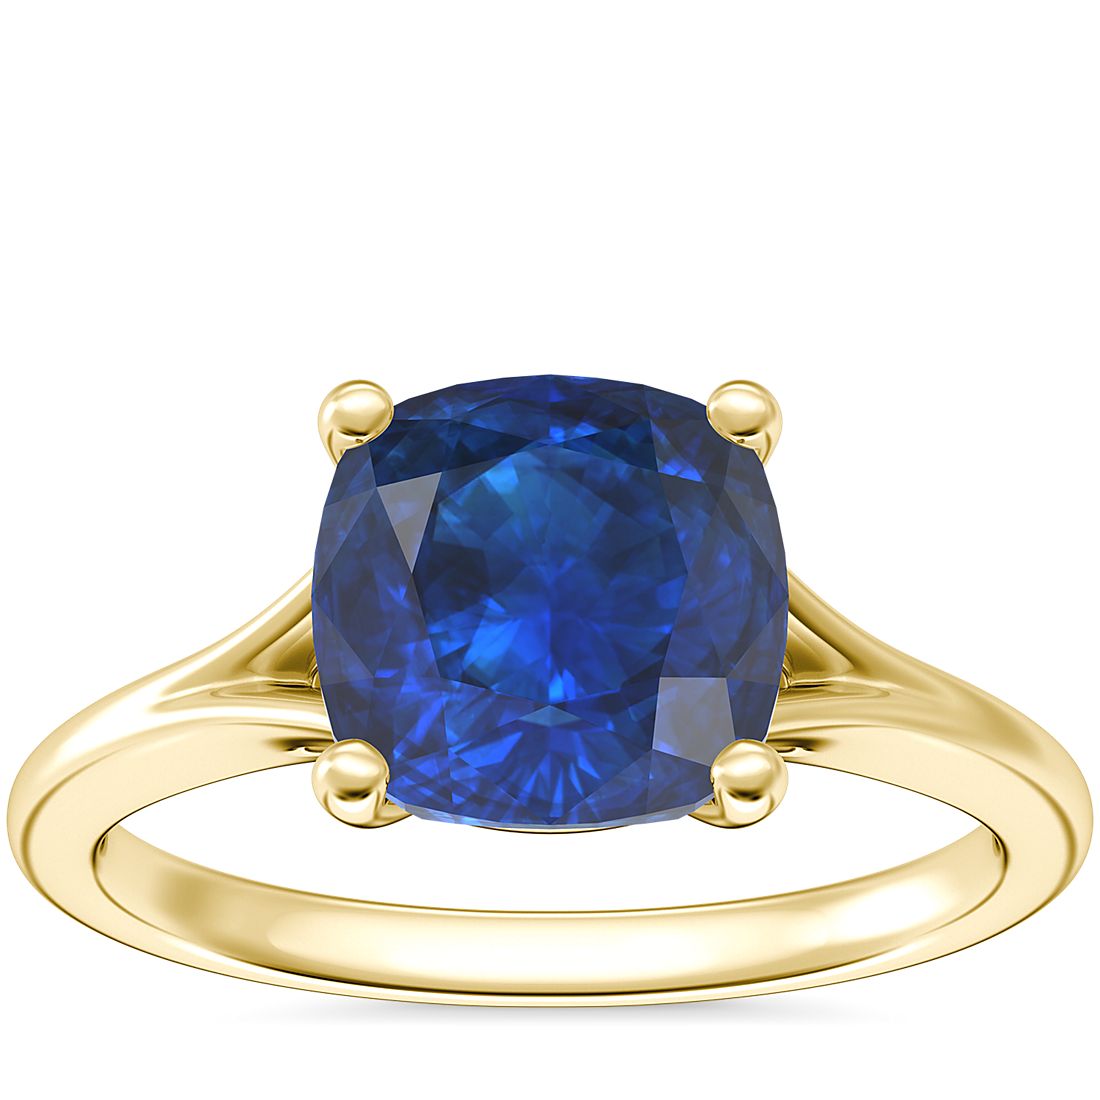 Petite Split Shank Solitaire Engagement Ring with Cushion Sapphire in 18k Yellow Gold (8mm)